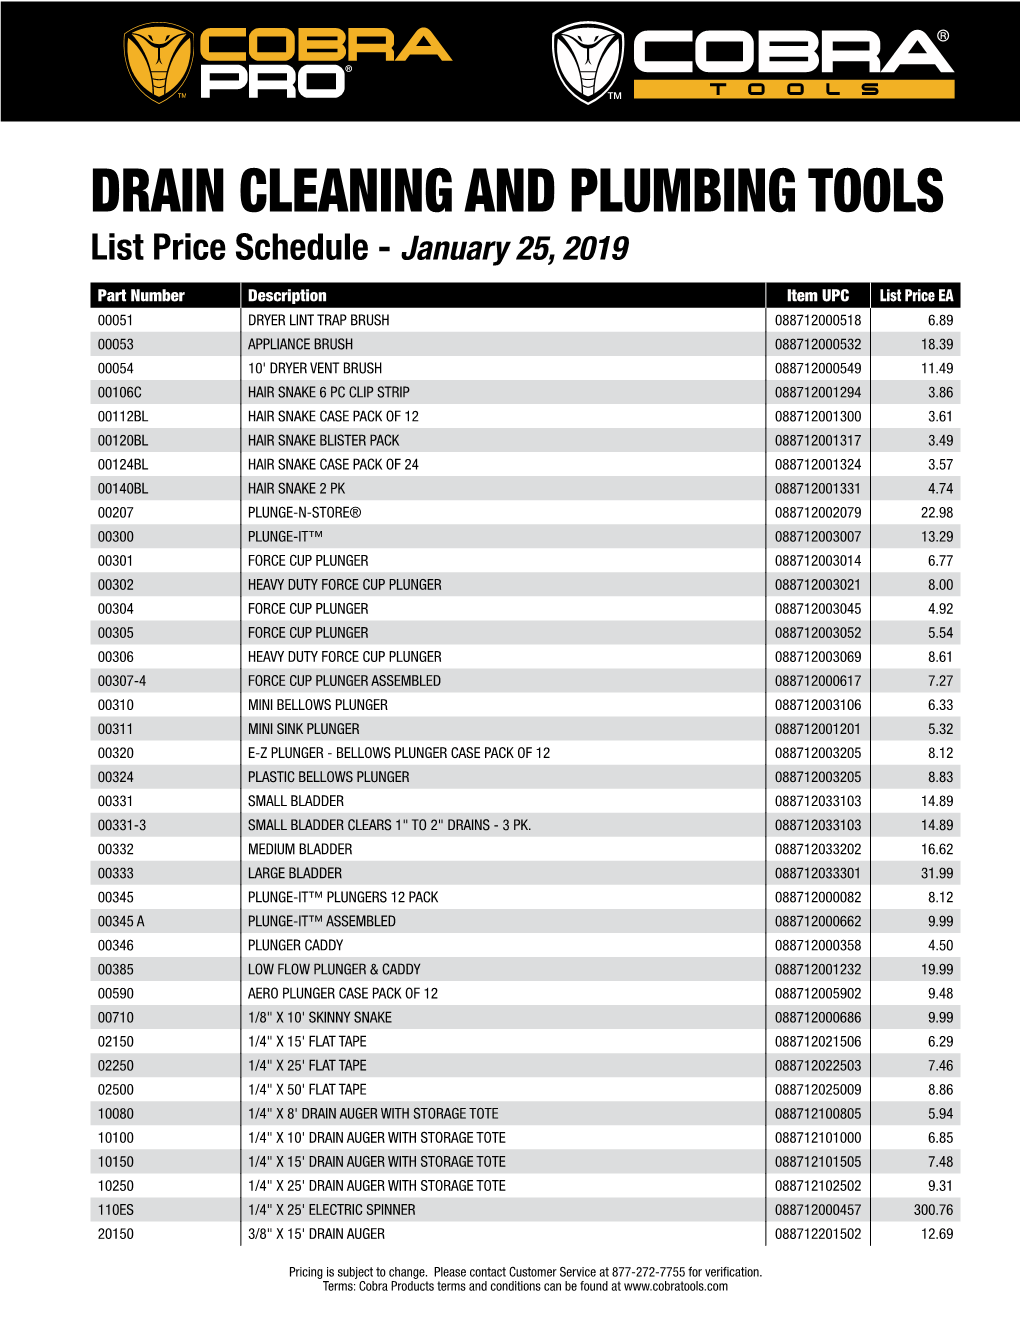 DRAIN CLEANING and PLUMBING TOOLS List Price Schedule - January 25, 2019